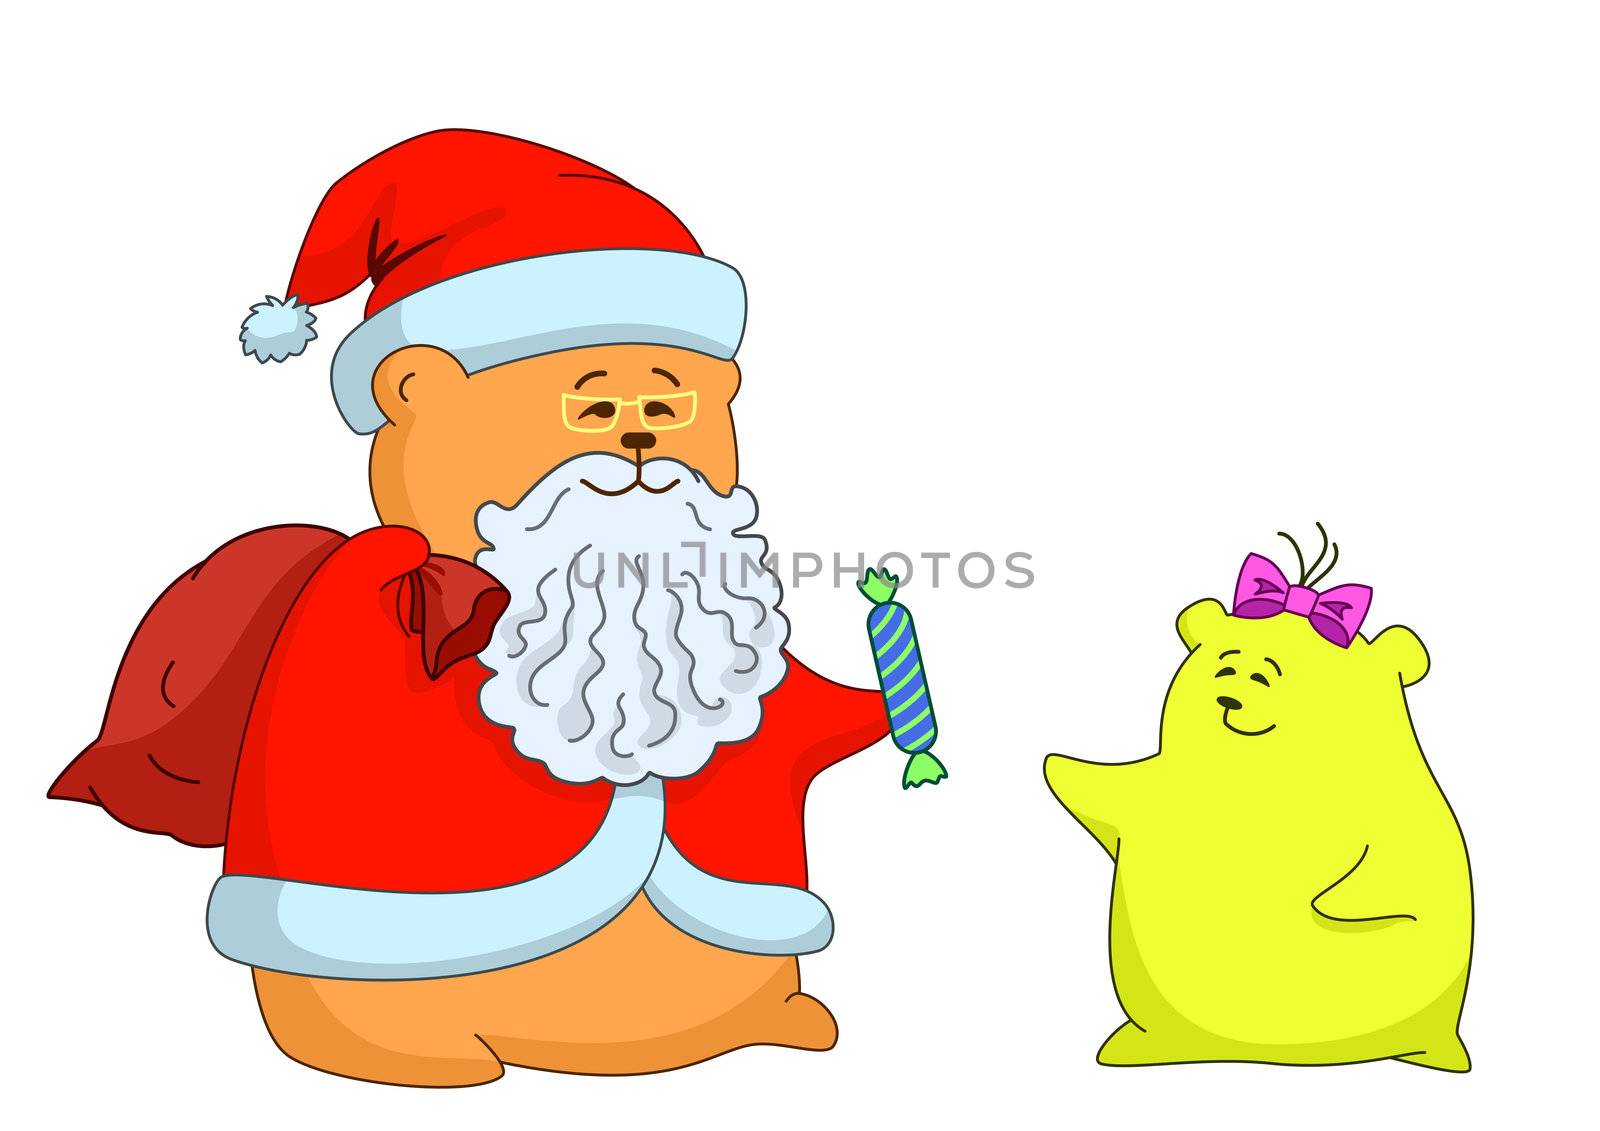 Santa Claus pillow in red fur coat and cap handing over candy to the little girl pillow